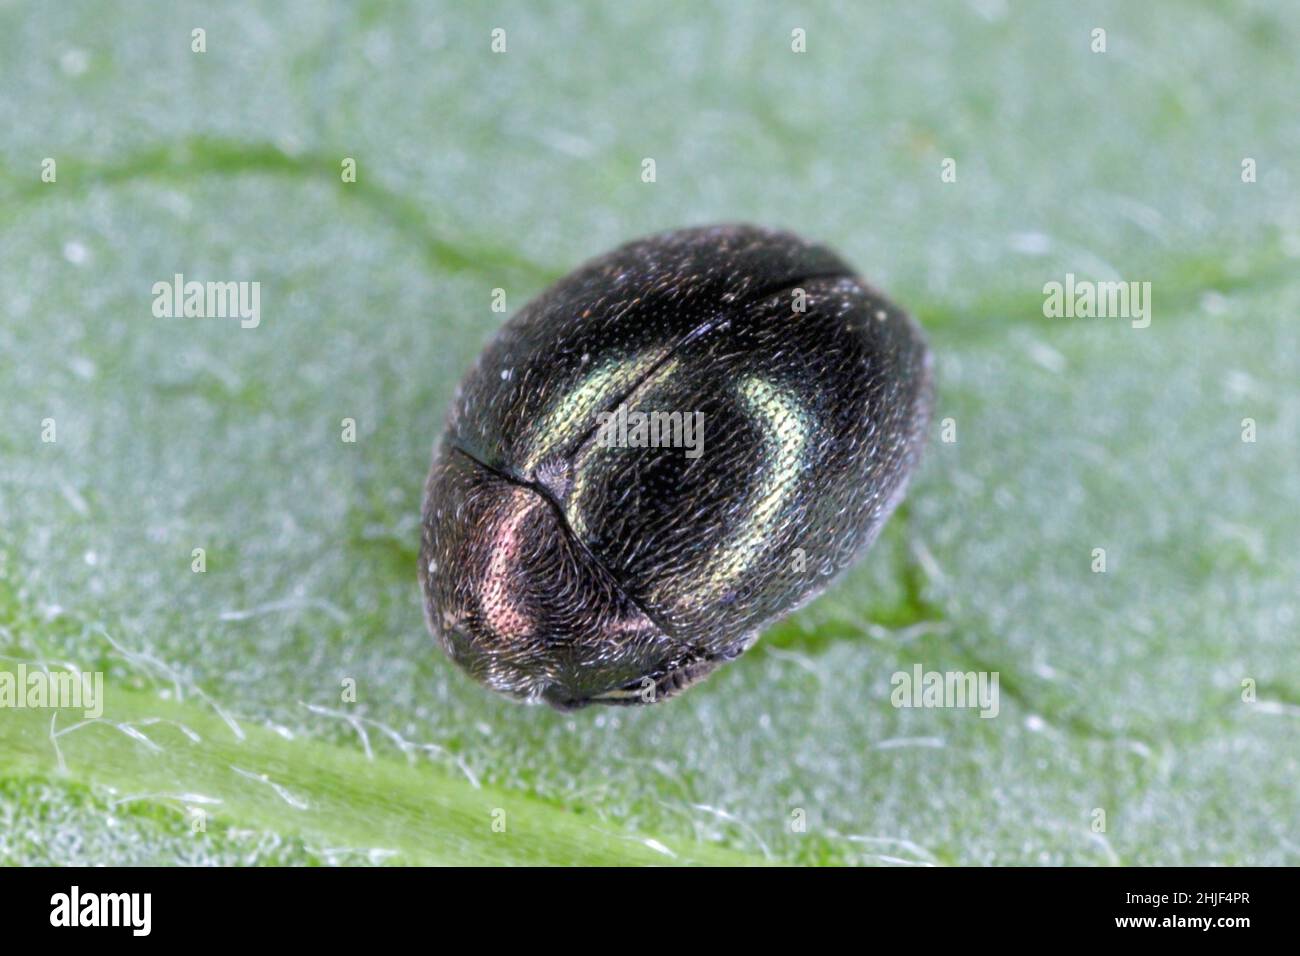 Lamprobyrrhulus nitidus - a species of beetle in the Byrrhidae family and subfamily Byrrhinae. Stock Photo